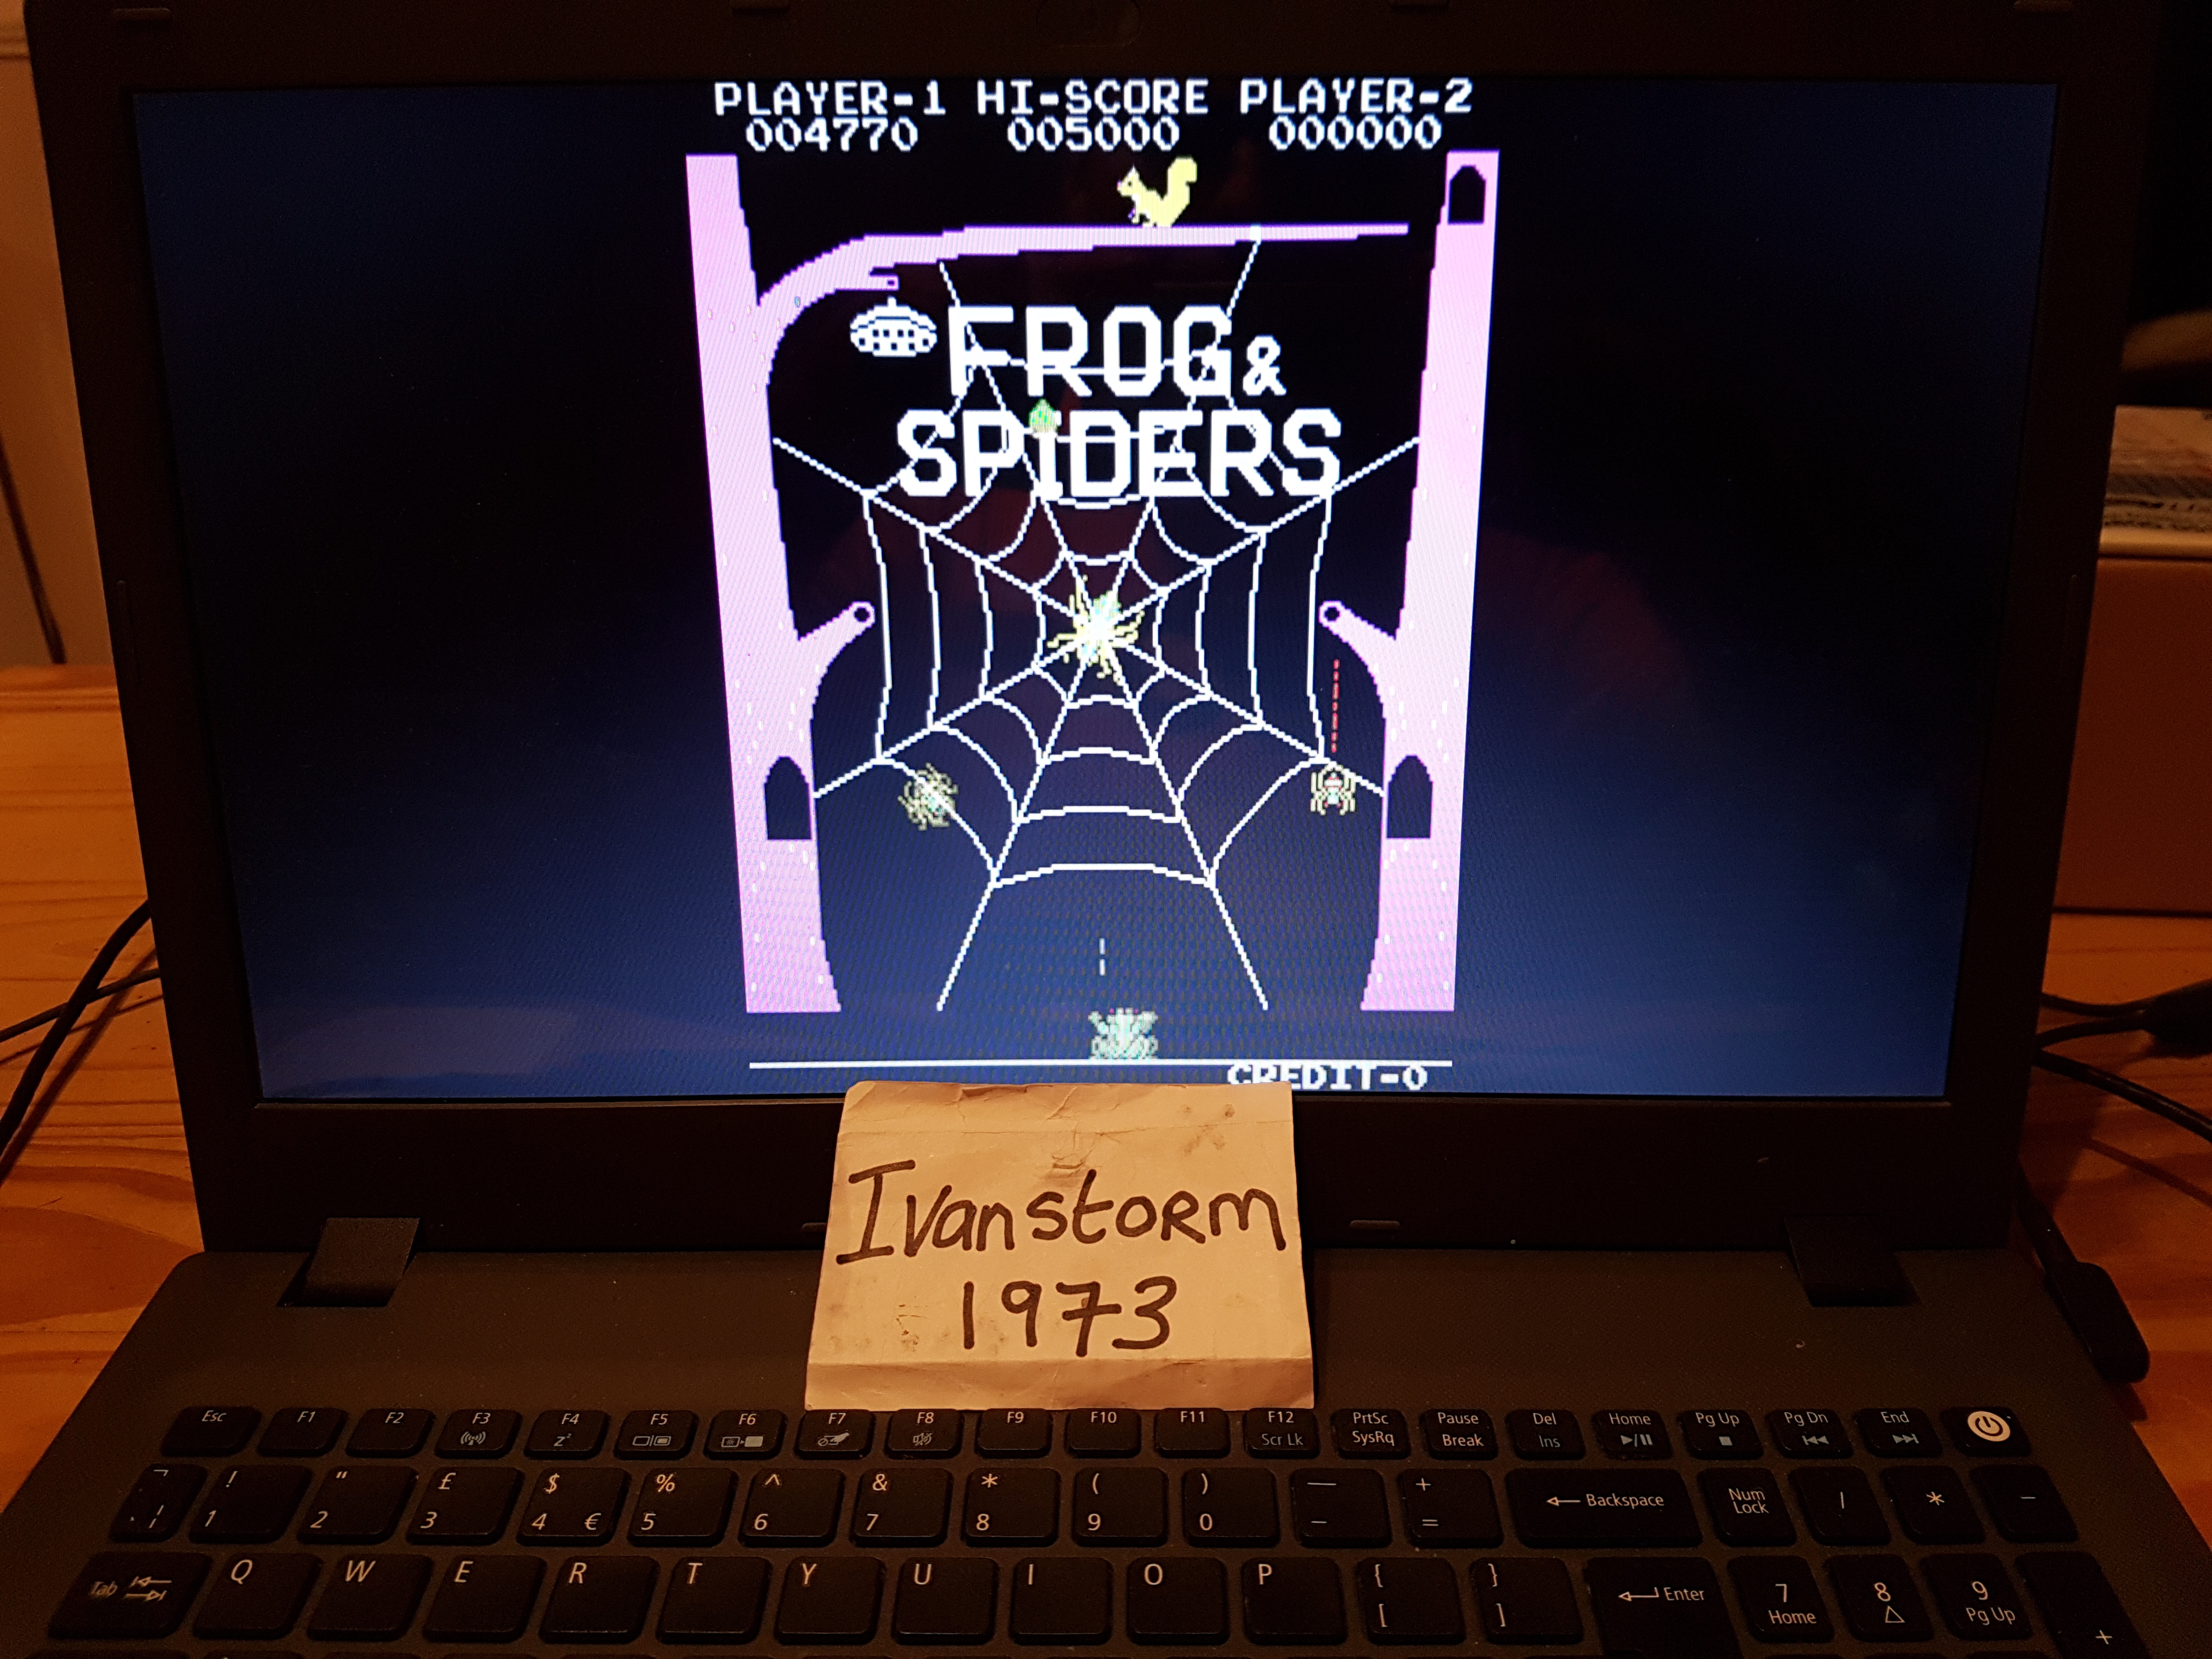 Ivanstorm1973: Frogs & Spiders [fspiderb] (Arcade Emulated / M.A.M.E.) 4,770 points on 2018-03-03 13:13:51